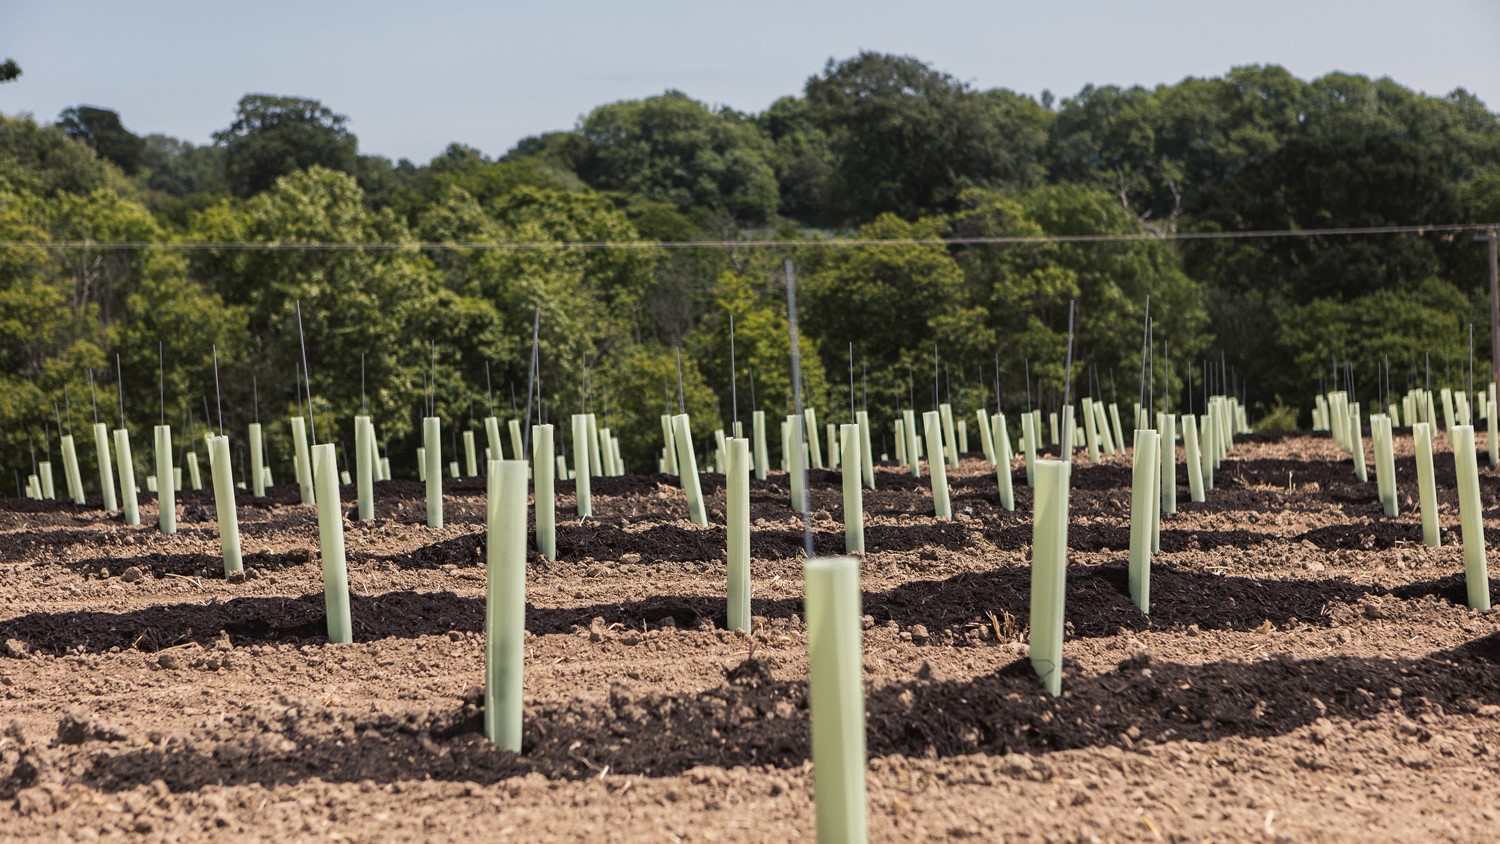 Newly planted vines at Tillingham